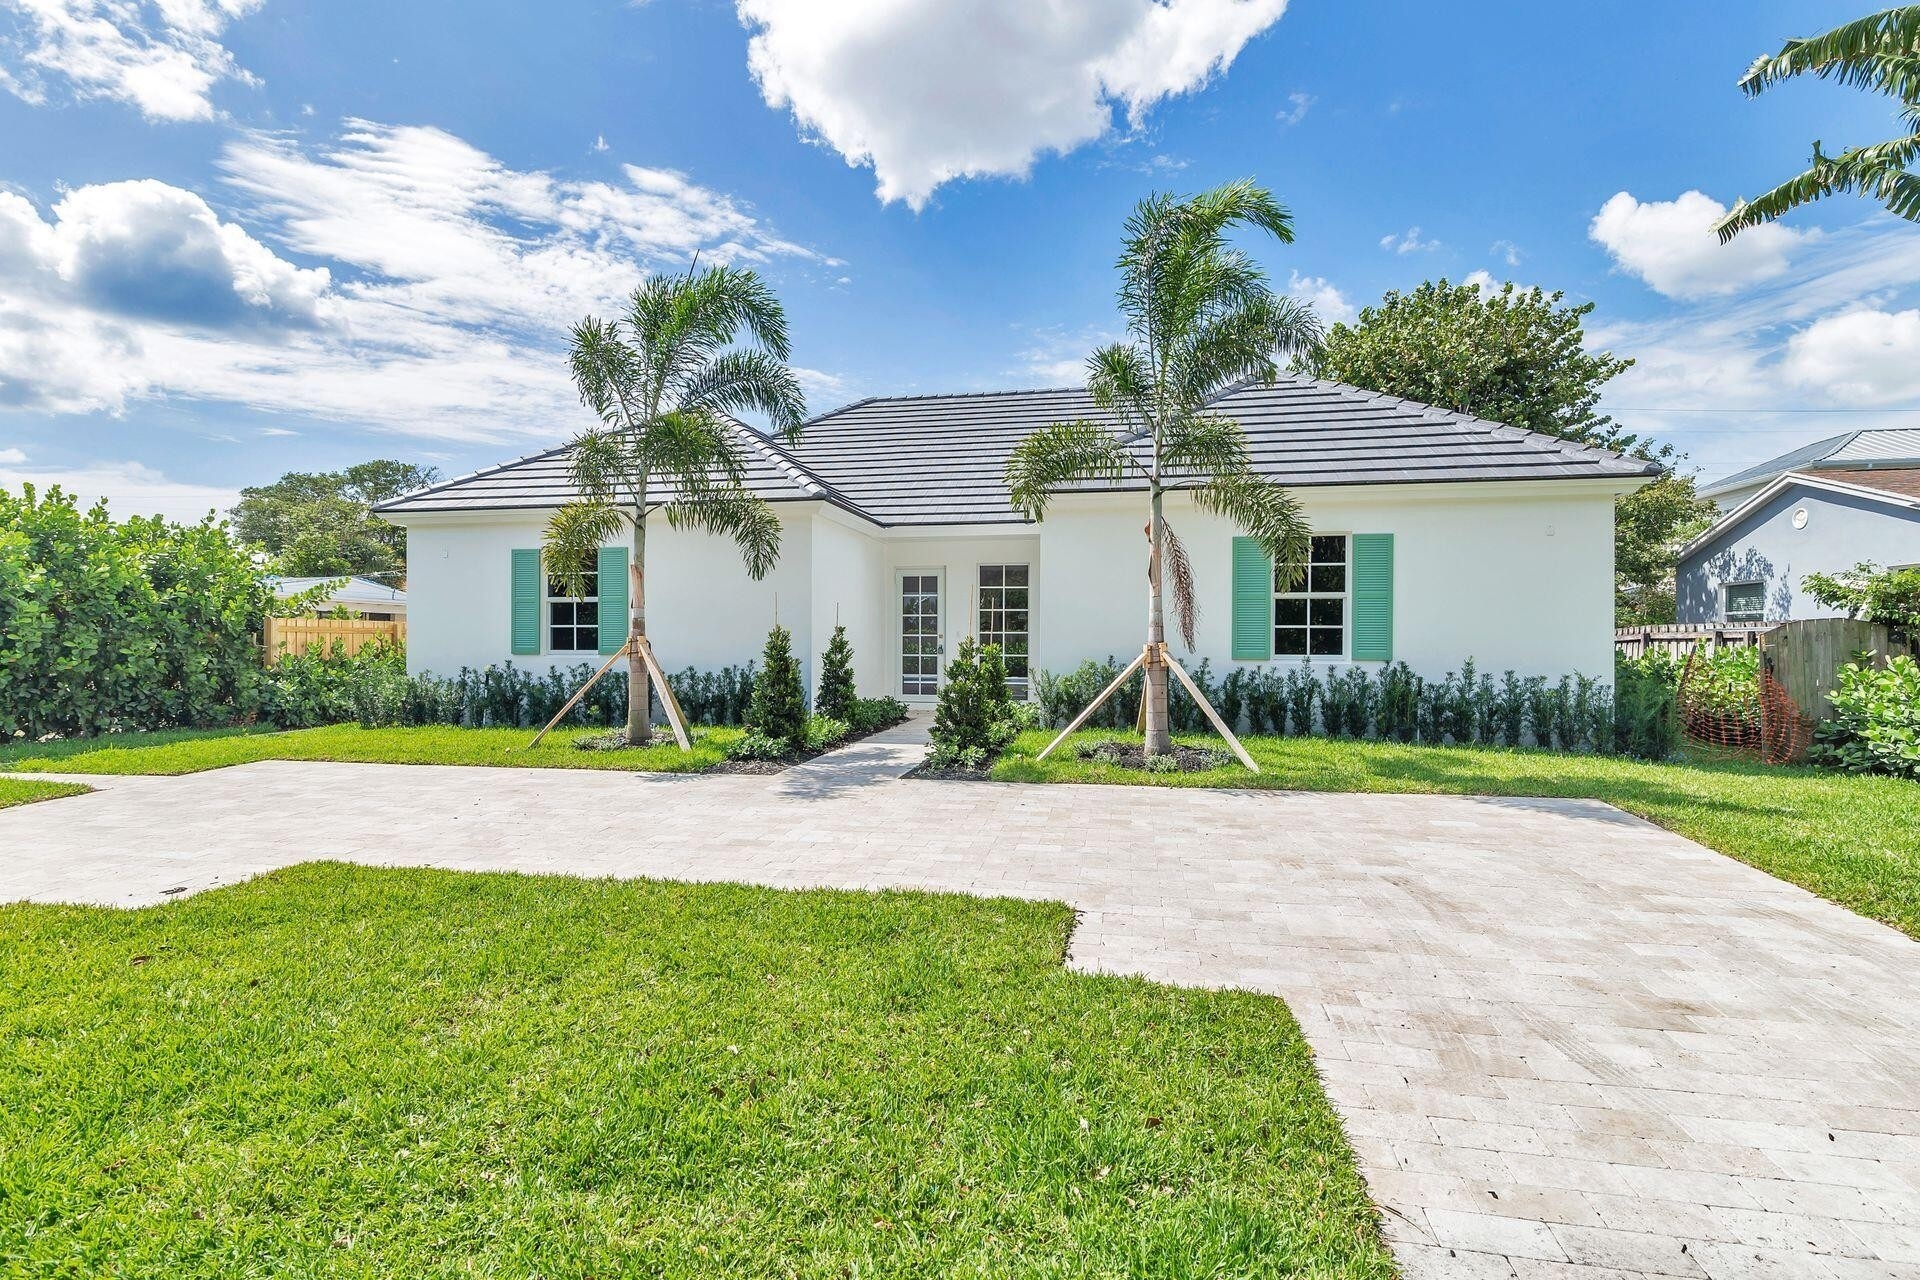 36. Single Family Homes for Sale at South End, West Palm Beach, FL 33405